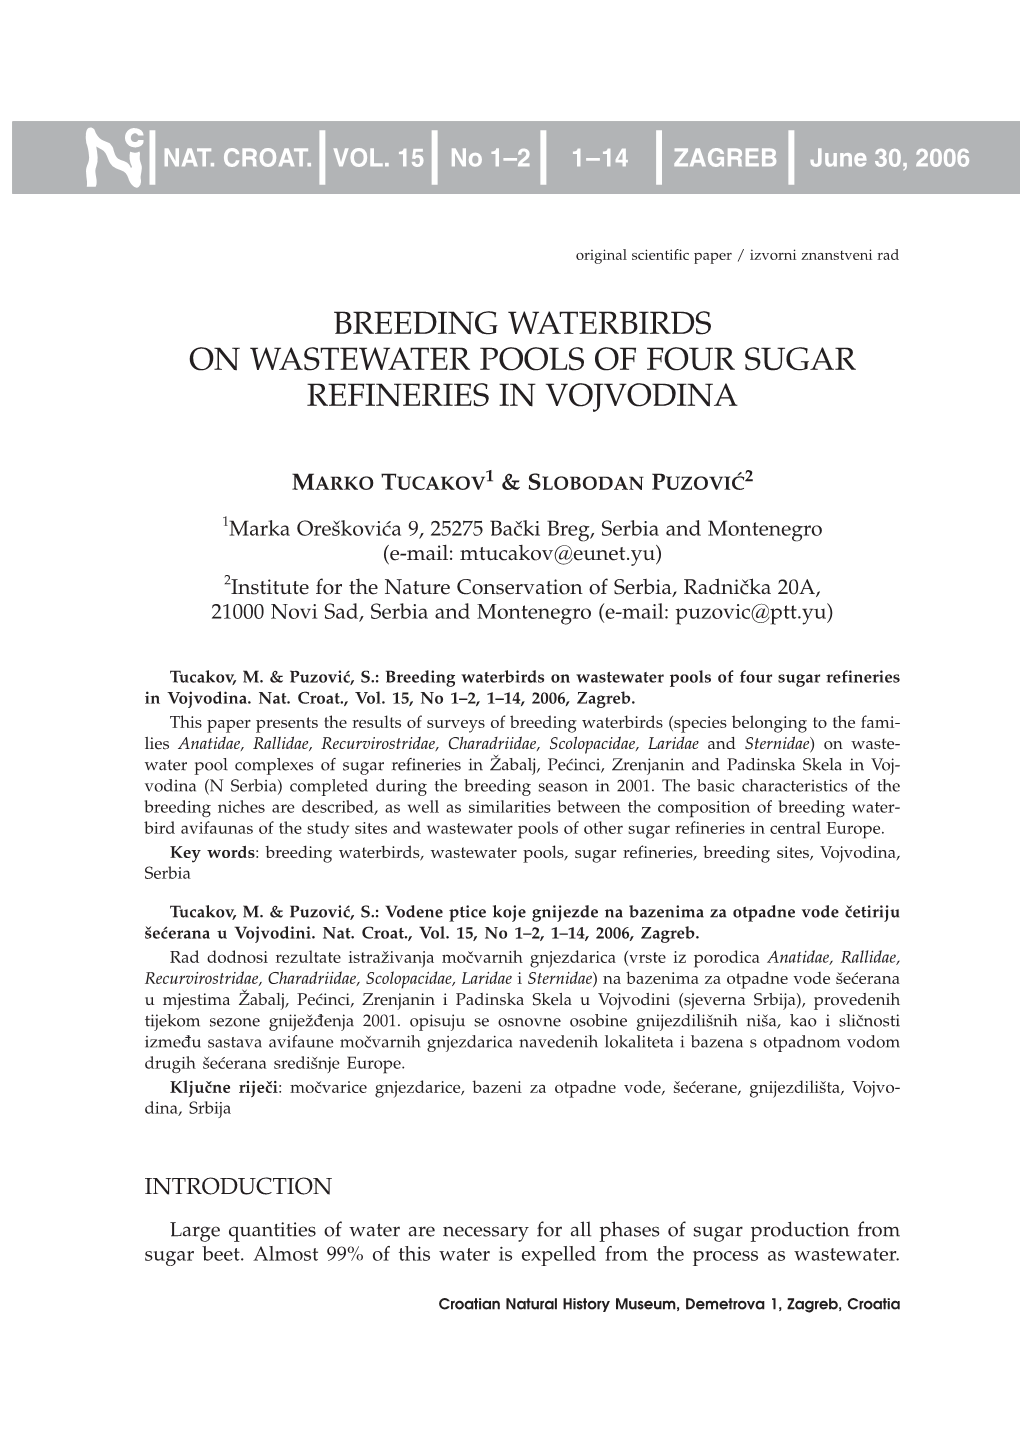 Breeding Waterbirds on Wastewater Pools of Four Sugar Refineries in Vojvodina